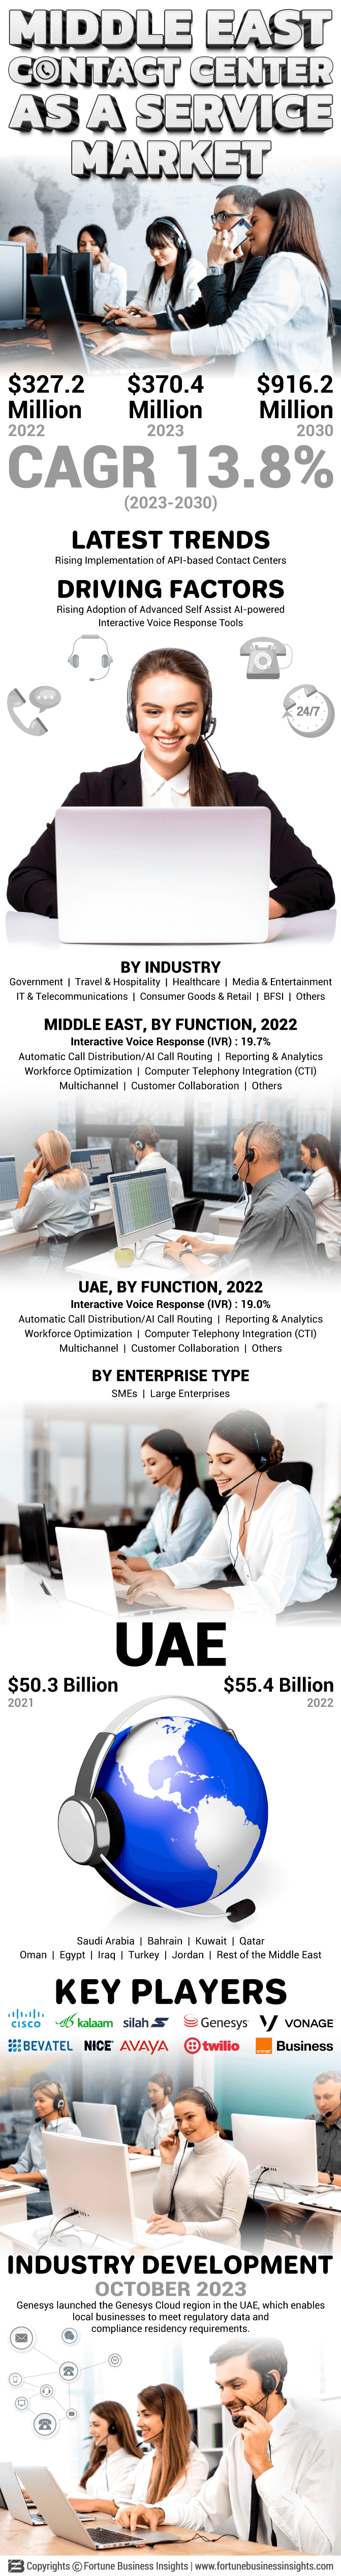 Middle East Contact Center as a Service Market